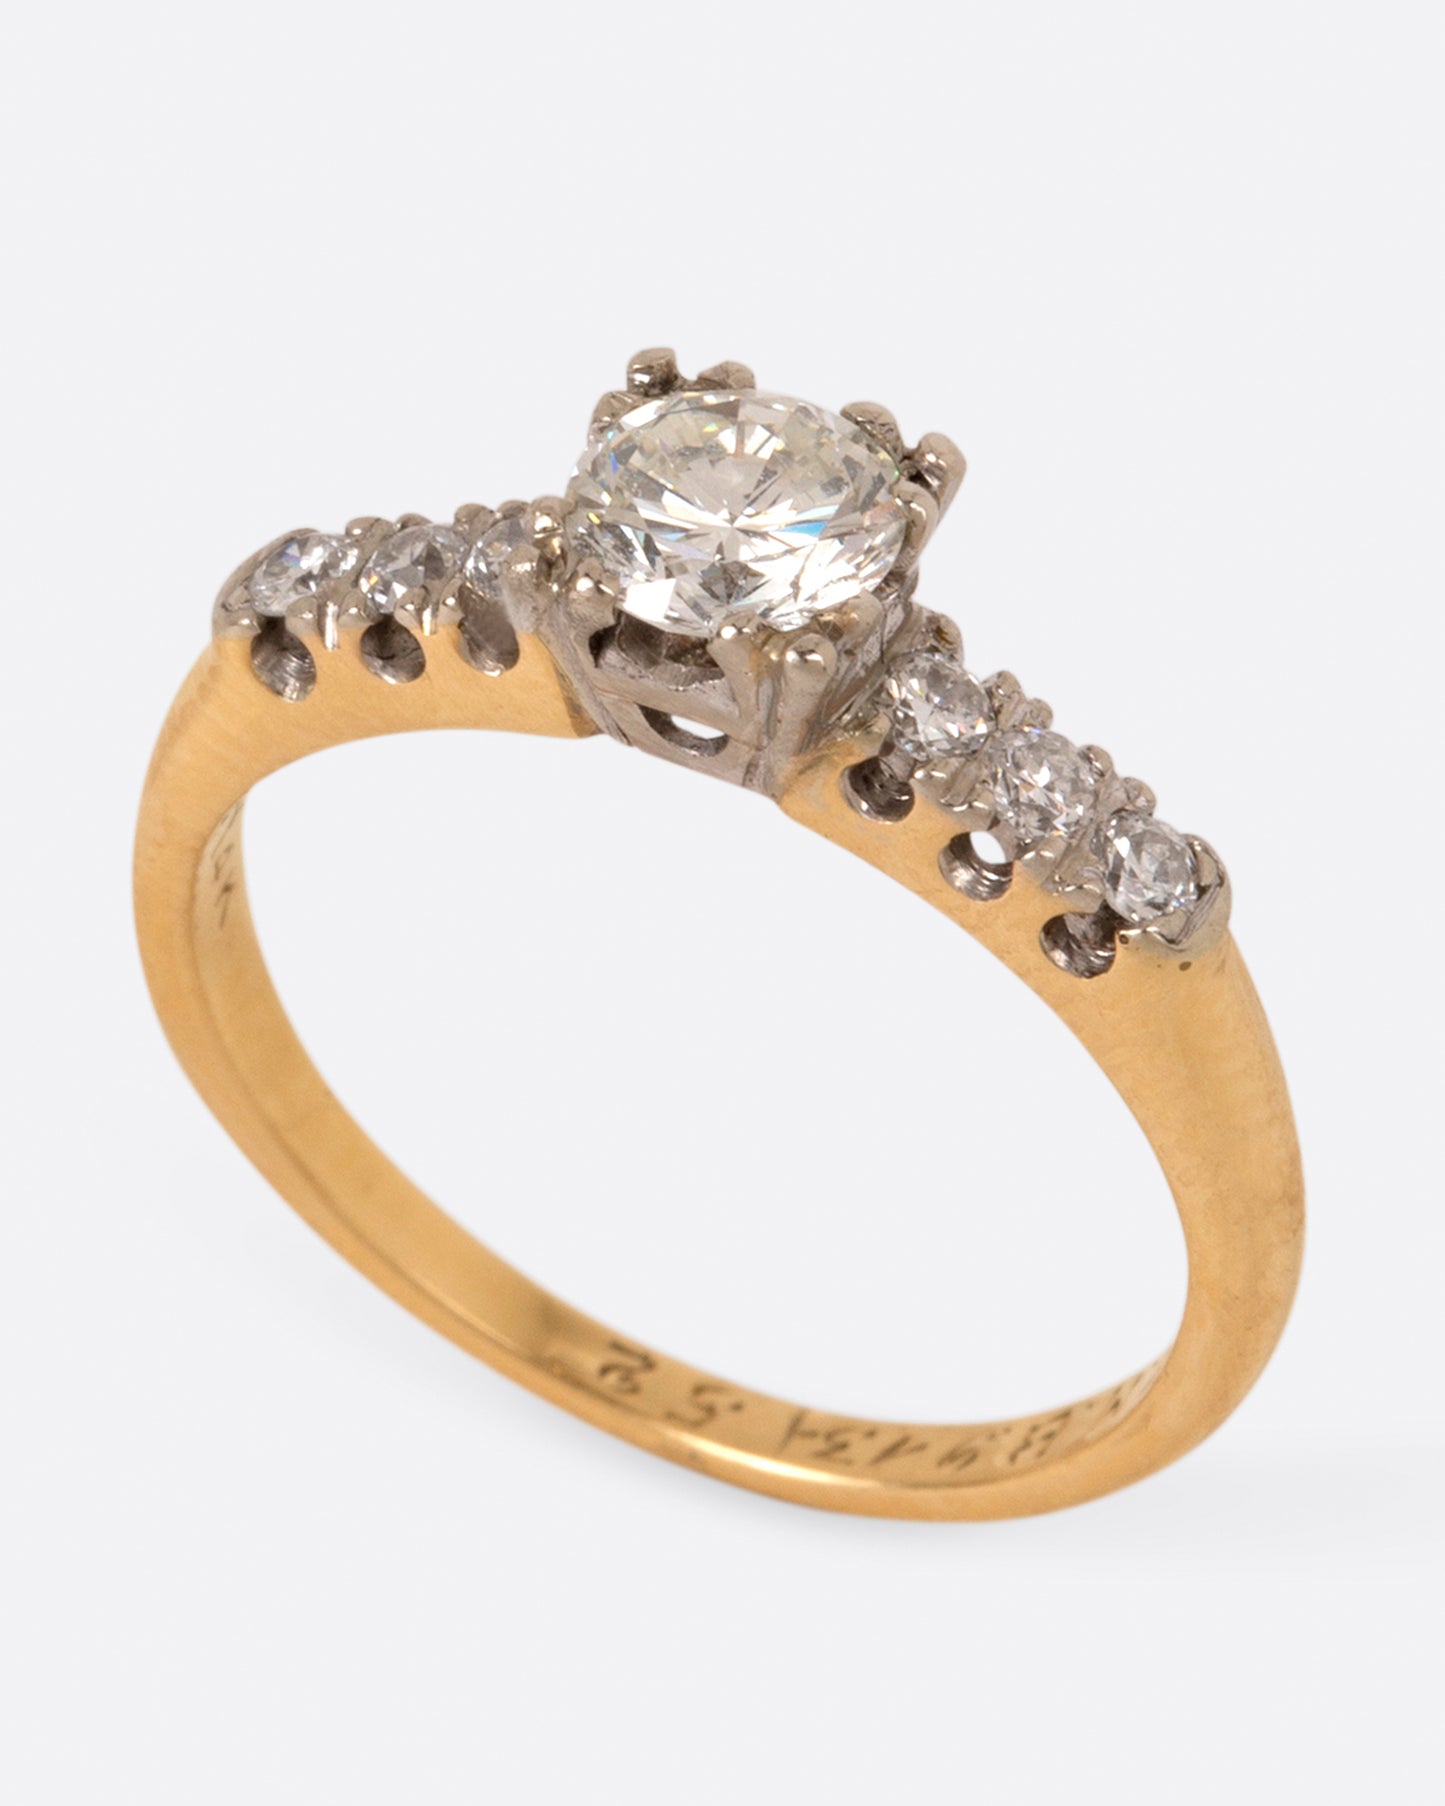 A yellow gold ring with a round center diamond and three smaller round diamonds on either side set in white gold prongs, shown standing.